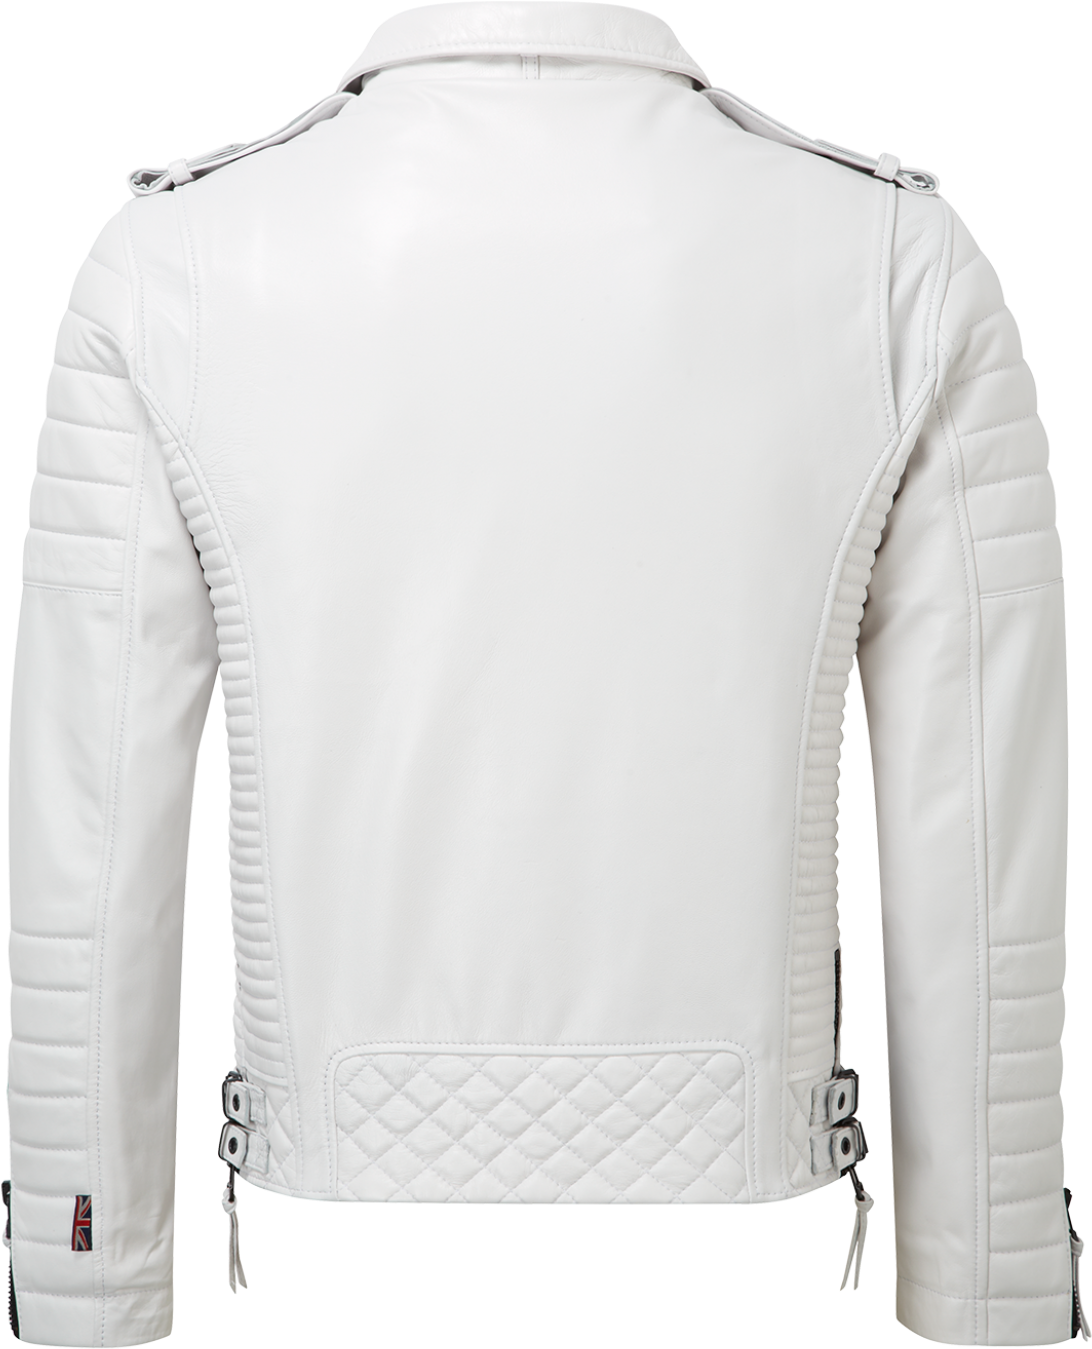 A White Leather Jacket With A Black Background